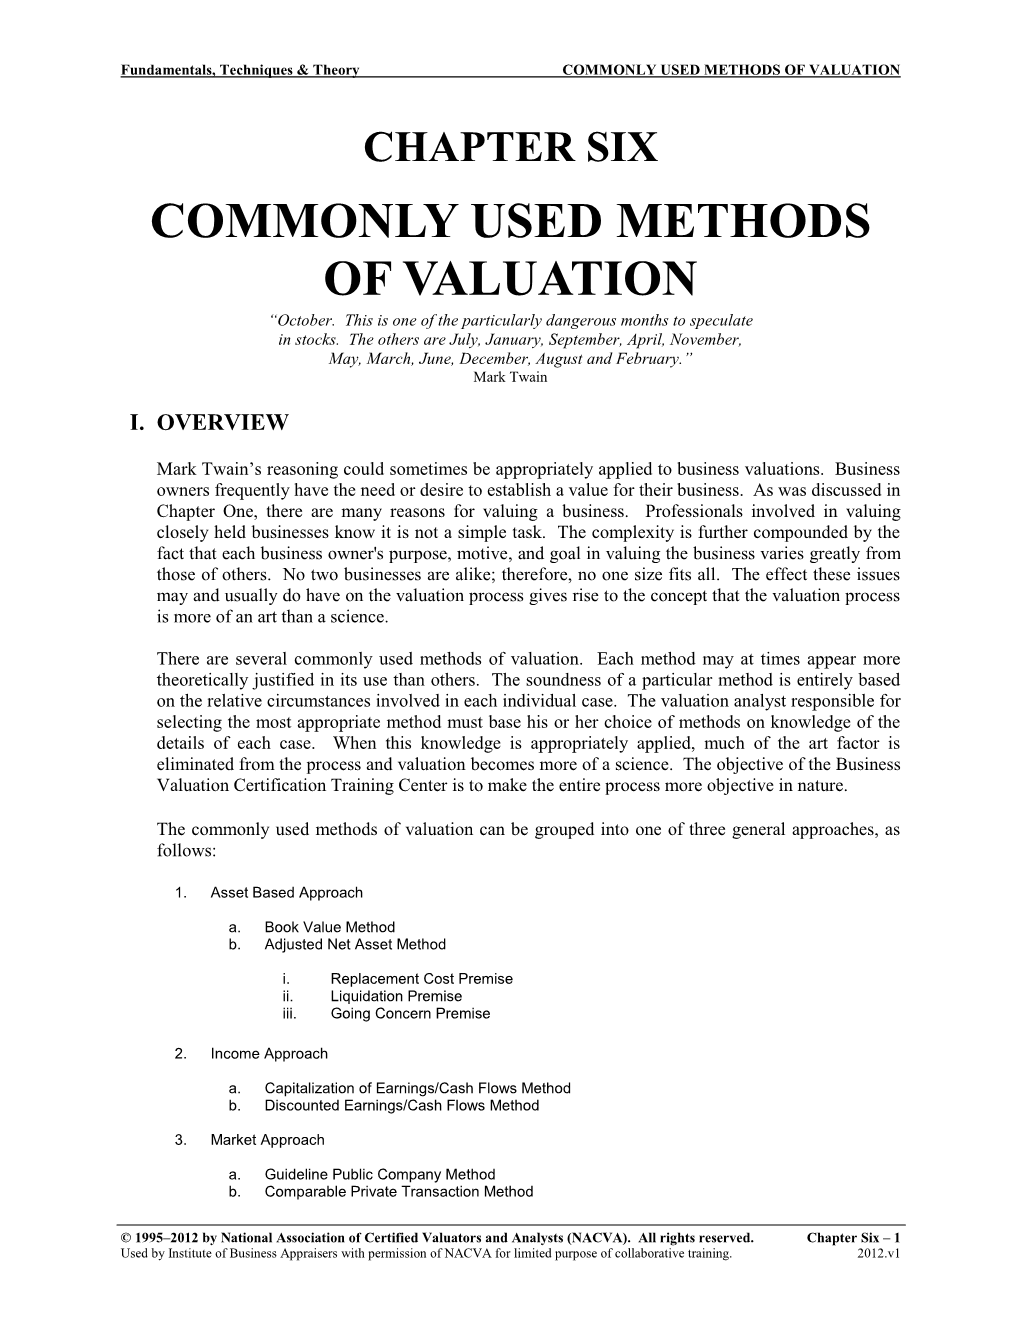 Commonly Used Methods of Valuation